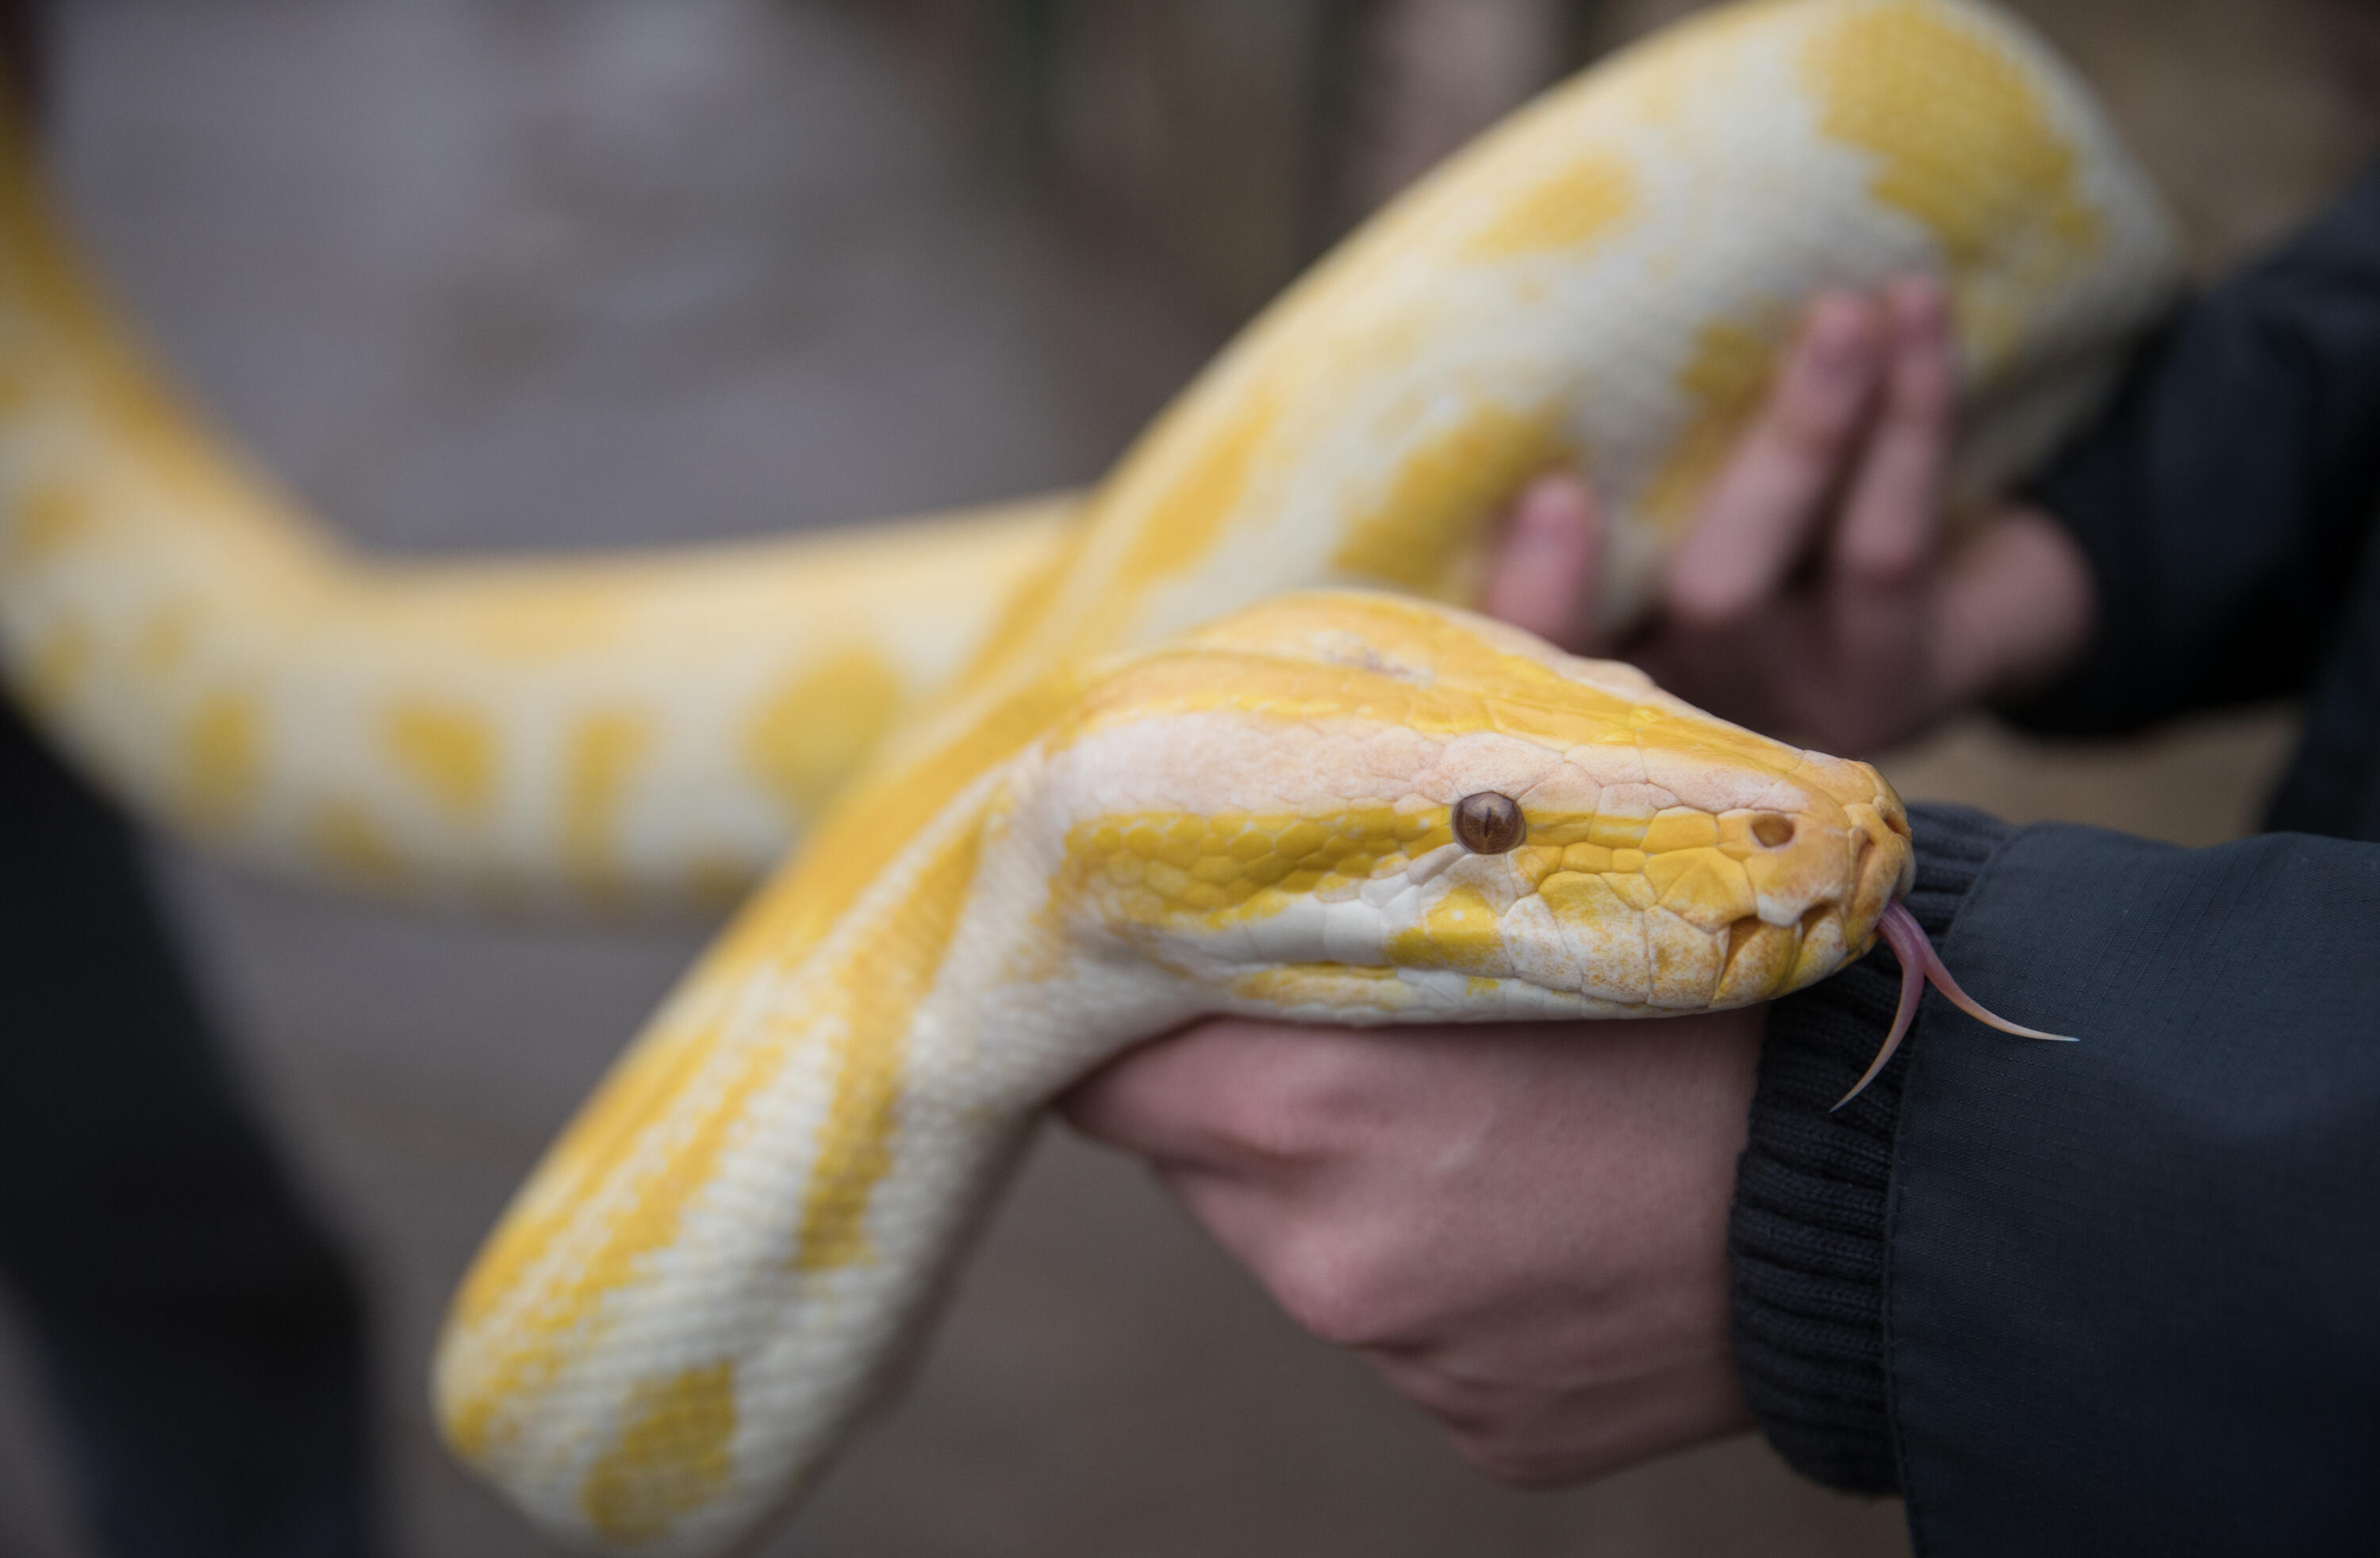 BRISTOL, ENGLAND - AUGUST 02:  Handlers hold an albino Burmese Python at Noah's Ark Zoo Farm on August 2, 2016 in Bristol, England. Noah's Ark Zoo Farm has teamed up with the Reptile Zone in Bristol to bring a fortnight of educational shows which allows m